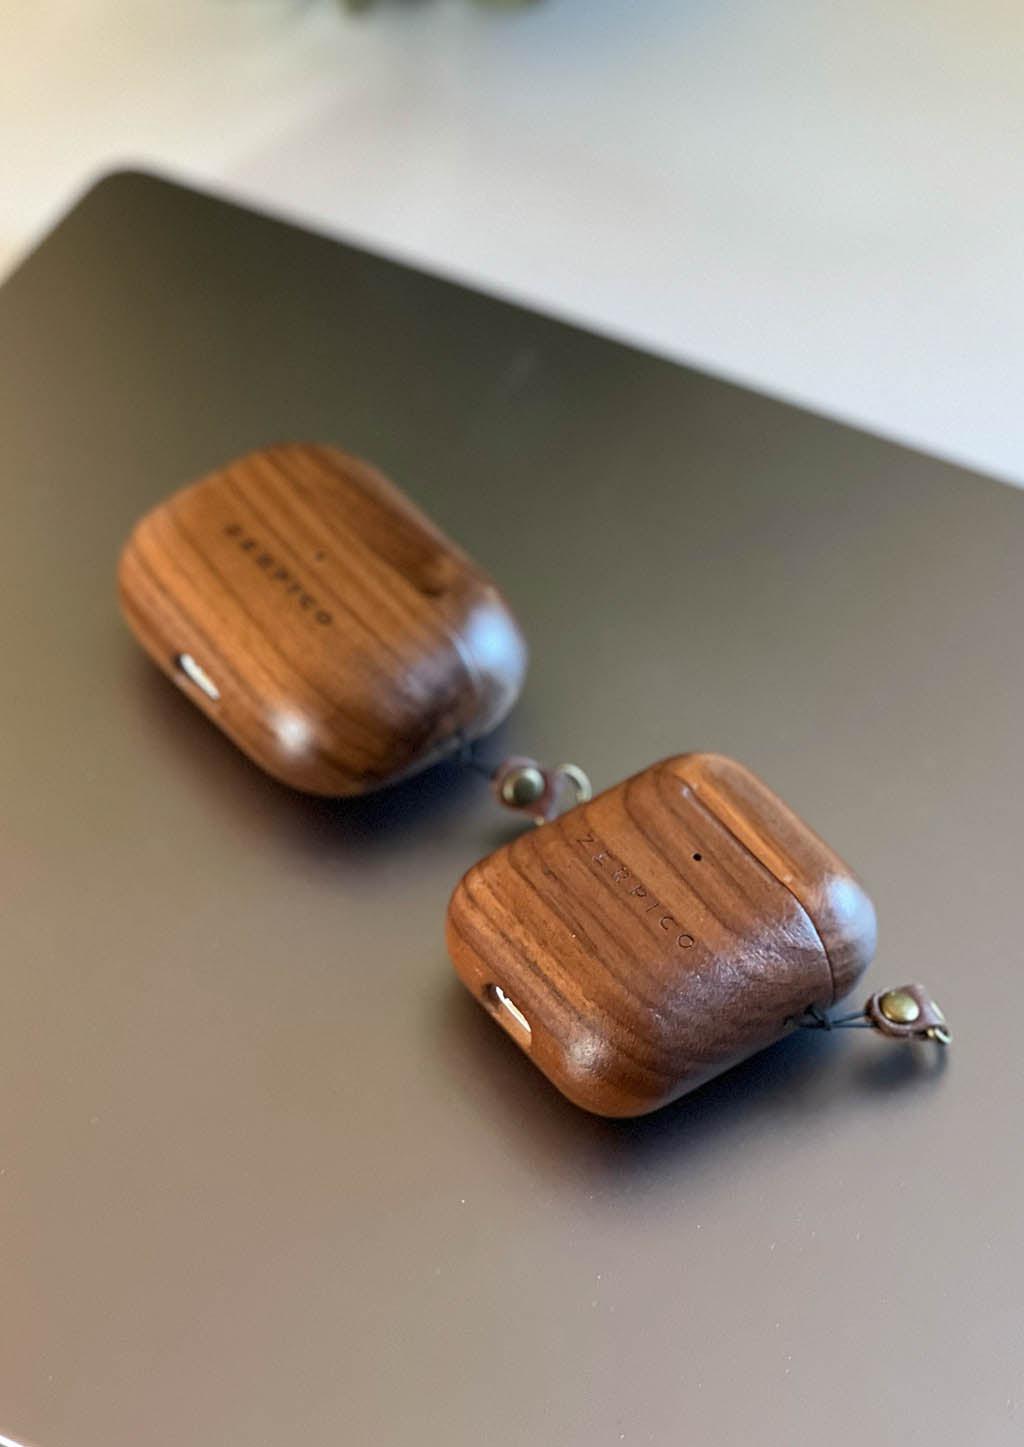 Zerpico Wooden Airpods case. Apple Airpods cases with a Macbook pro.